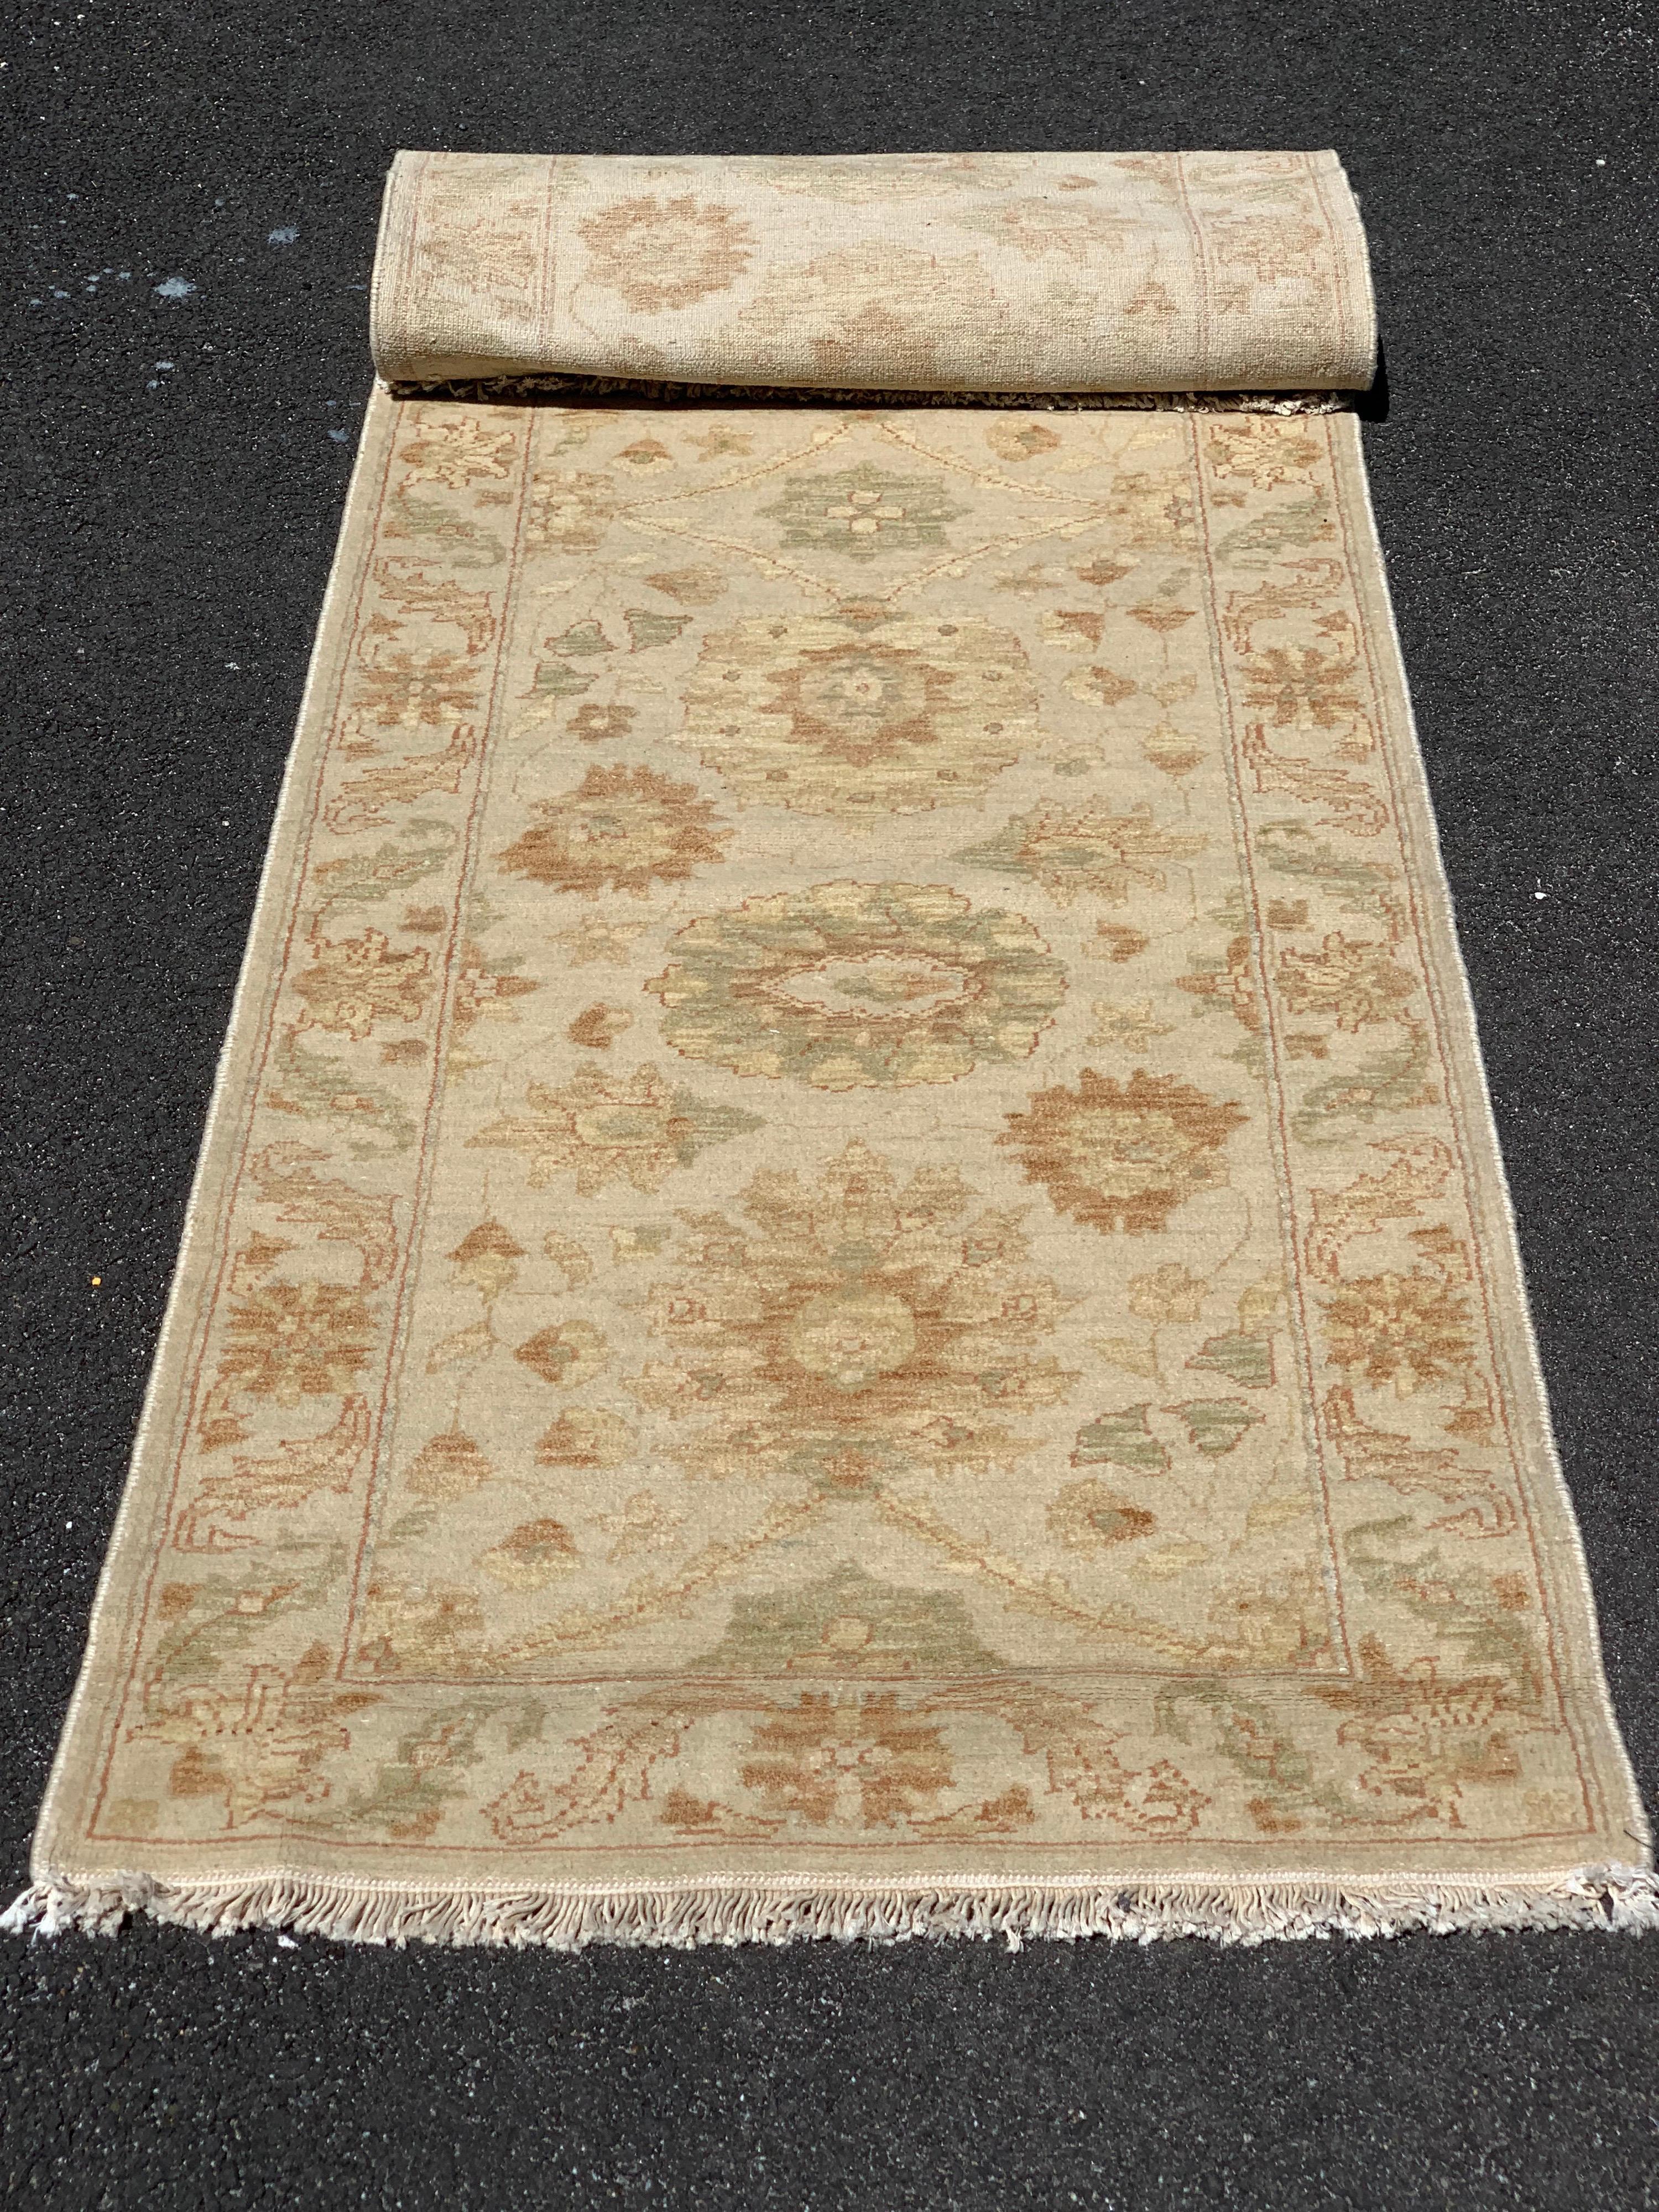 This is a new late 20th century long and narrow beige ivory floral Persian style runner rug handwoven in Alexandria, Egypt in 1990s. We manufactured these rugs and the design and colors were hand chosen by us and we have a wide variety of sizes in